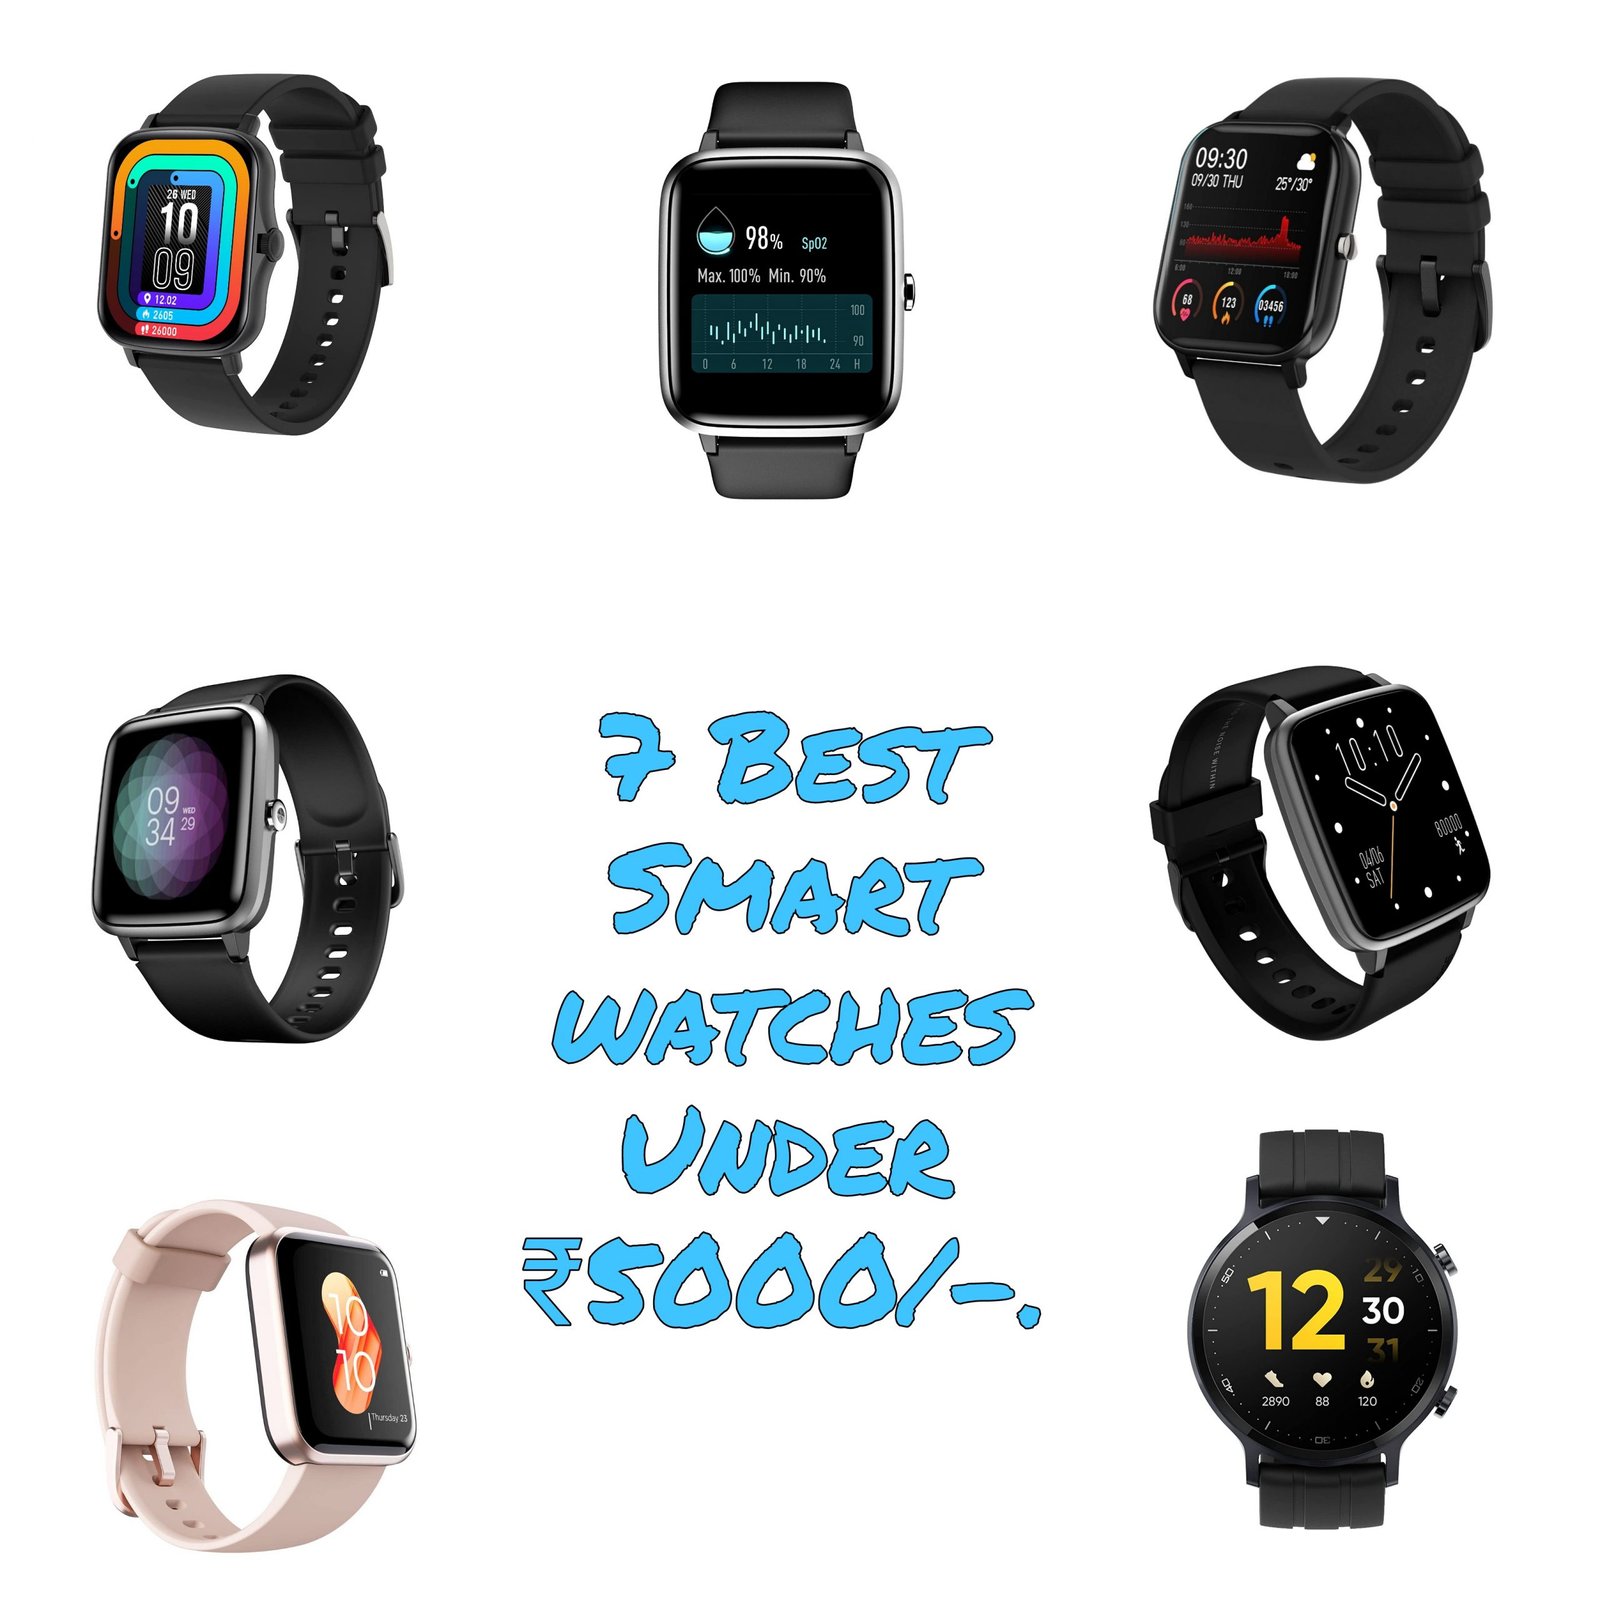 Top 7 Best smartwatches under RS.5000 in India